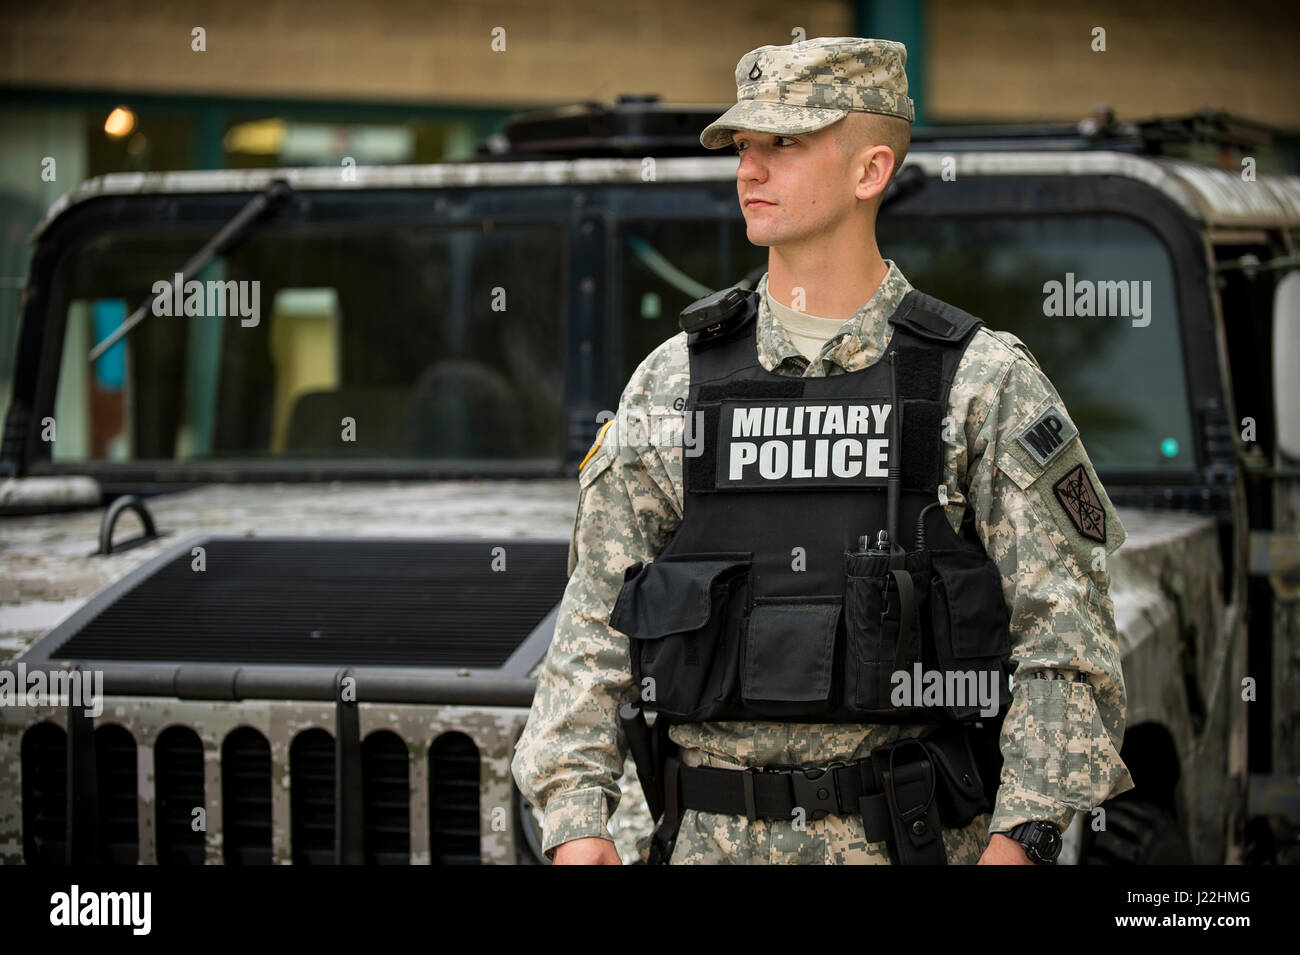 Pfc. Stephen Grams, U.S. Army Reserve military police Soldier from the